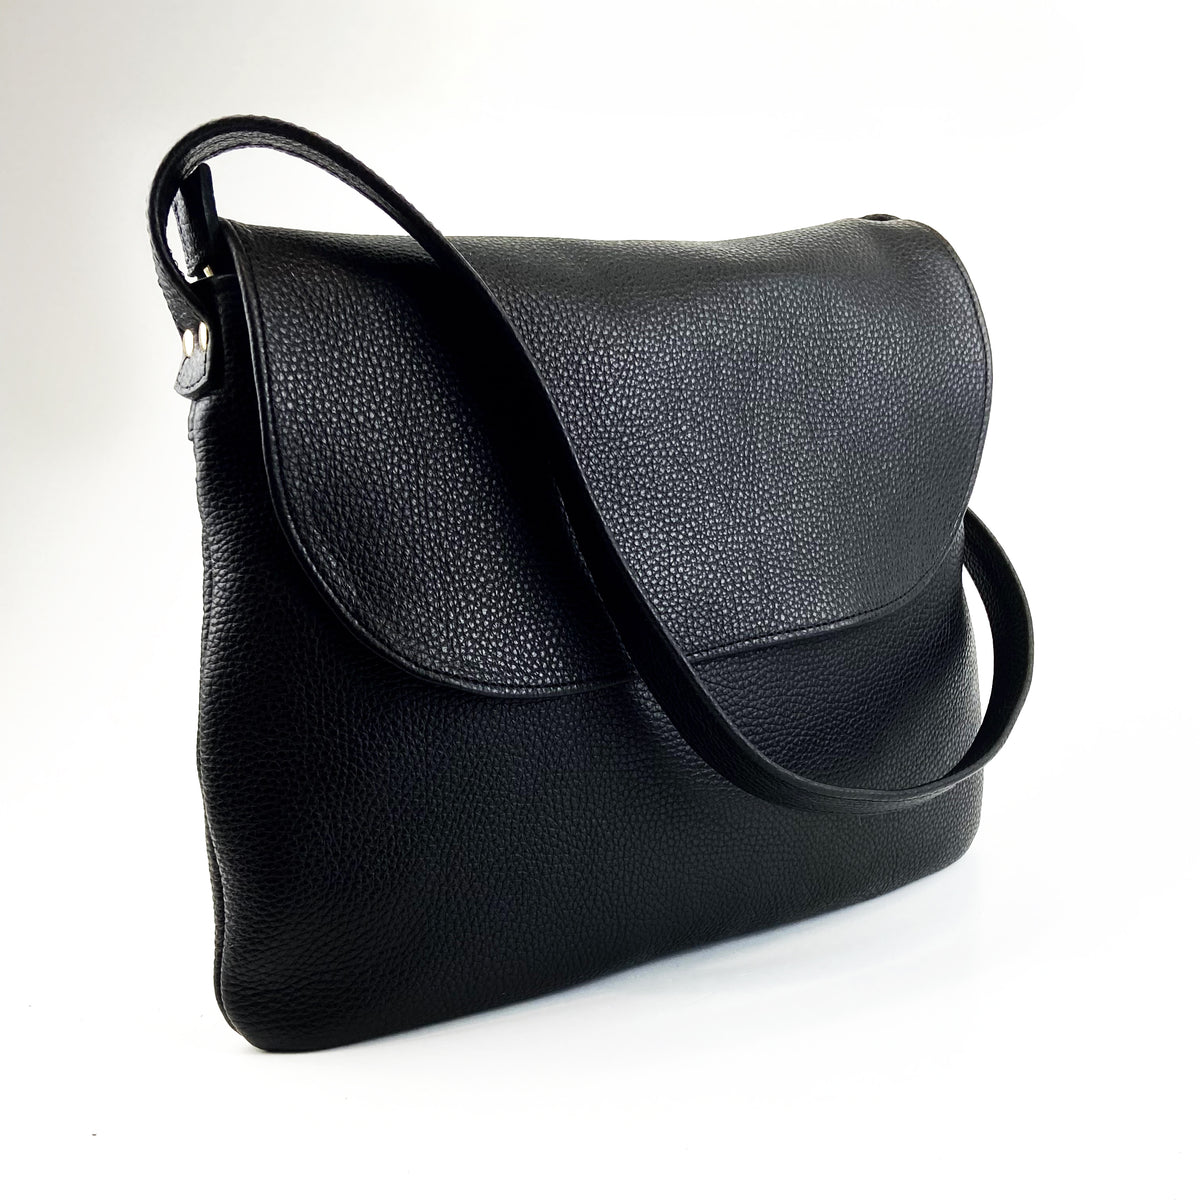 Minny Satchel with back pocket in black pebble leather